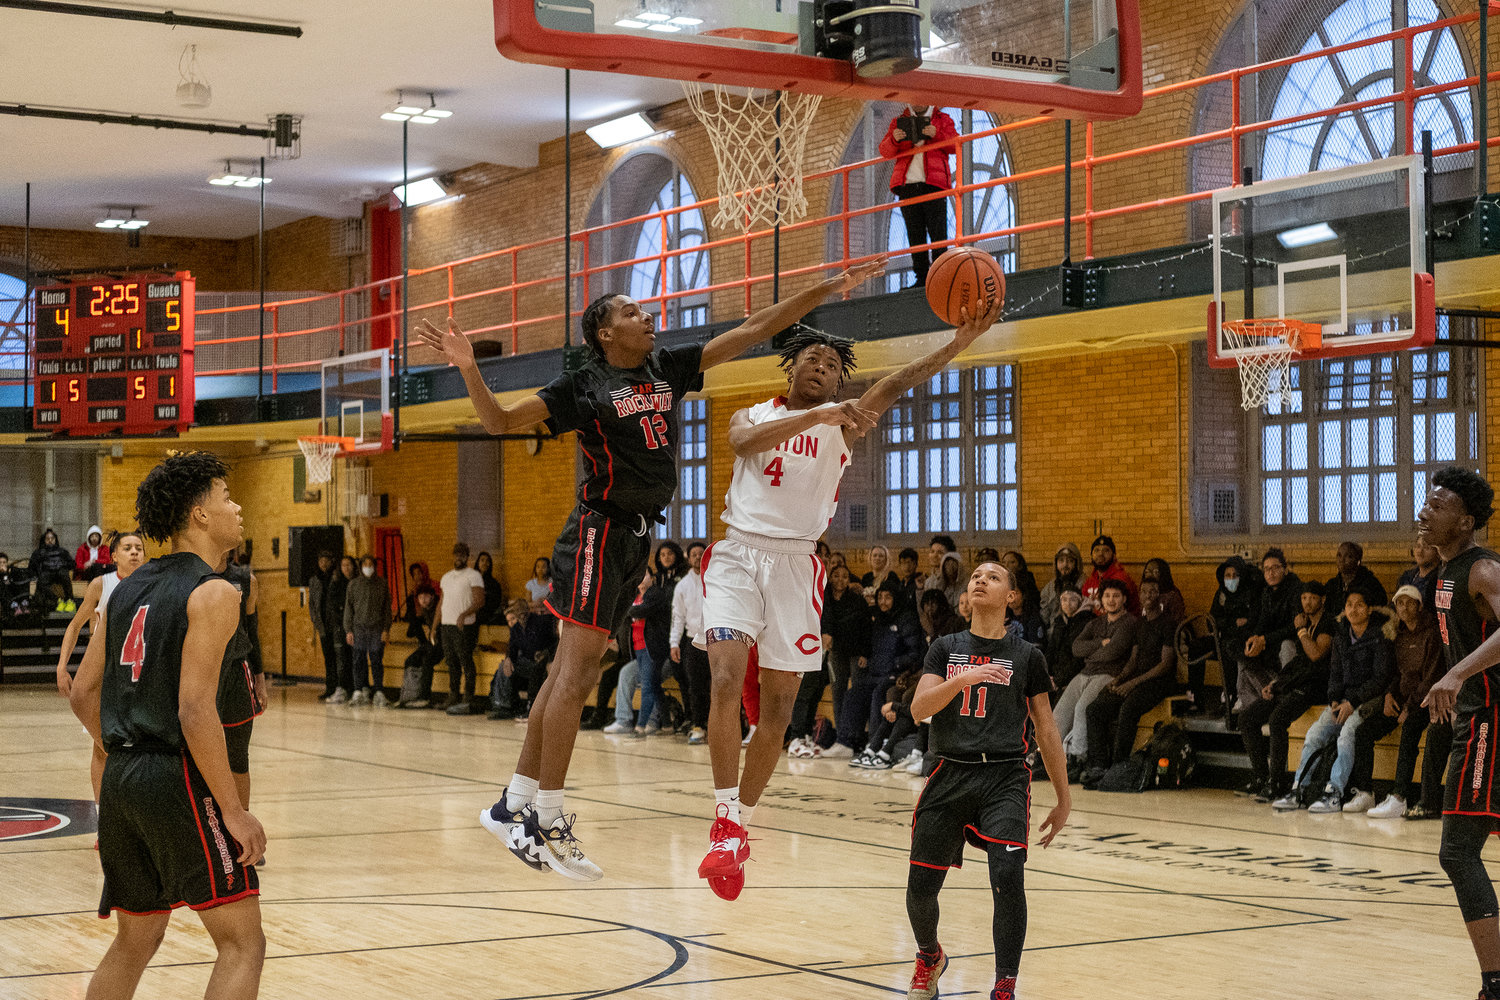 Very early in the first quarter in the Governors’ playoff game against Far Rockaway, Jason Coachman makes his way to the basket for a layup. DeWitt Clinton High School trailed early but powered past the Sea Horses, 66-40 to advance in the citywide playoffs.